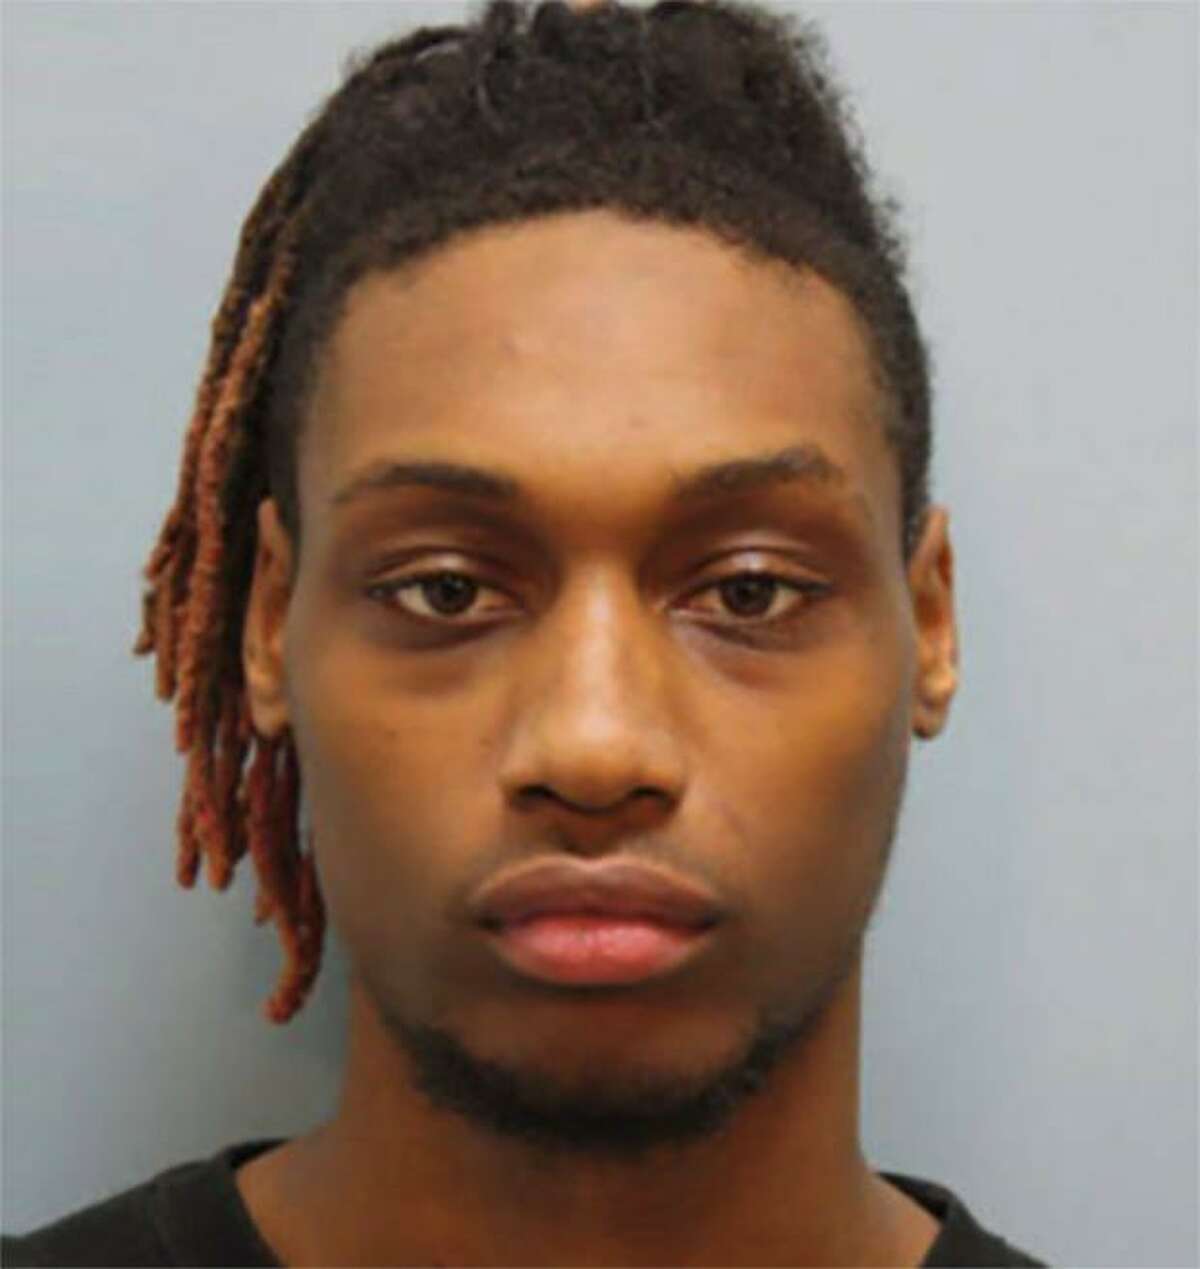 Dwayne Wharton, 19, was charged with capital murder in the death of 47-year-old Leandro Morales Jr. at his Gates Randal Court home last week. Second suspect arrested in the homeowner slaying.